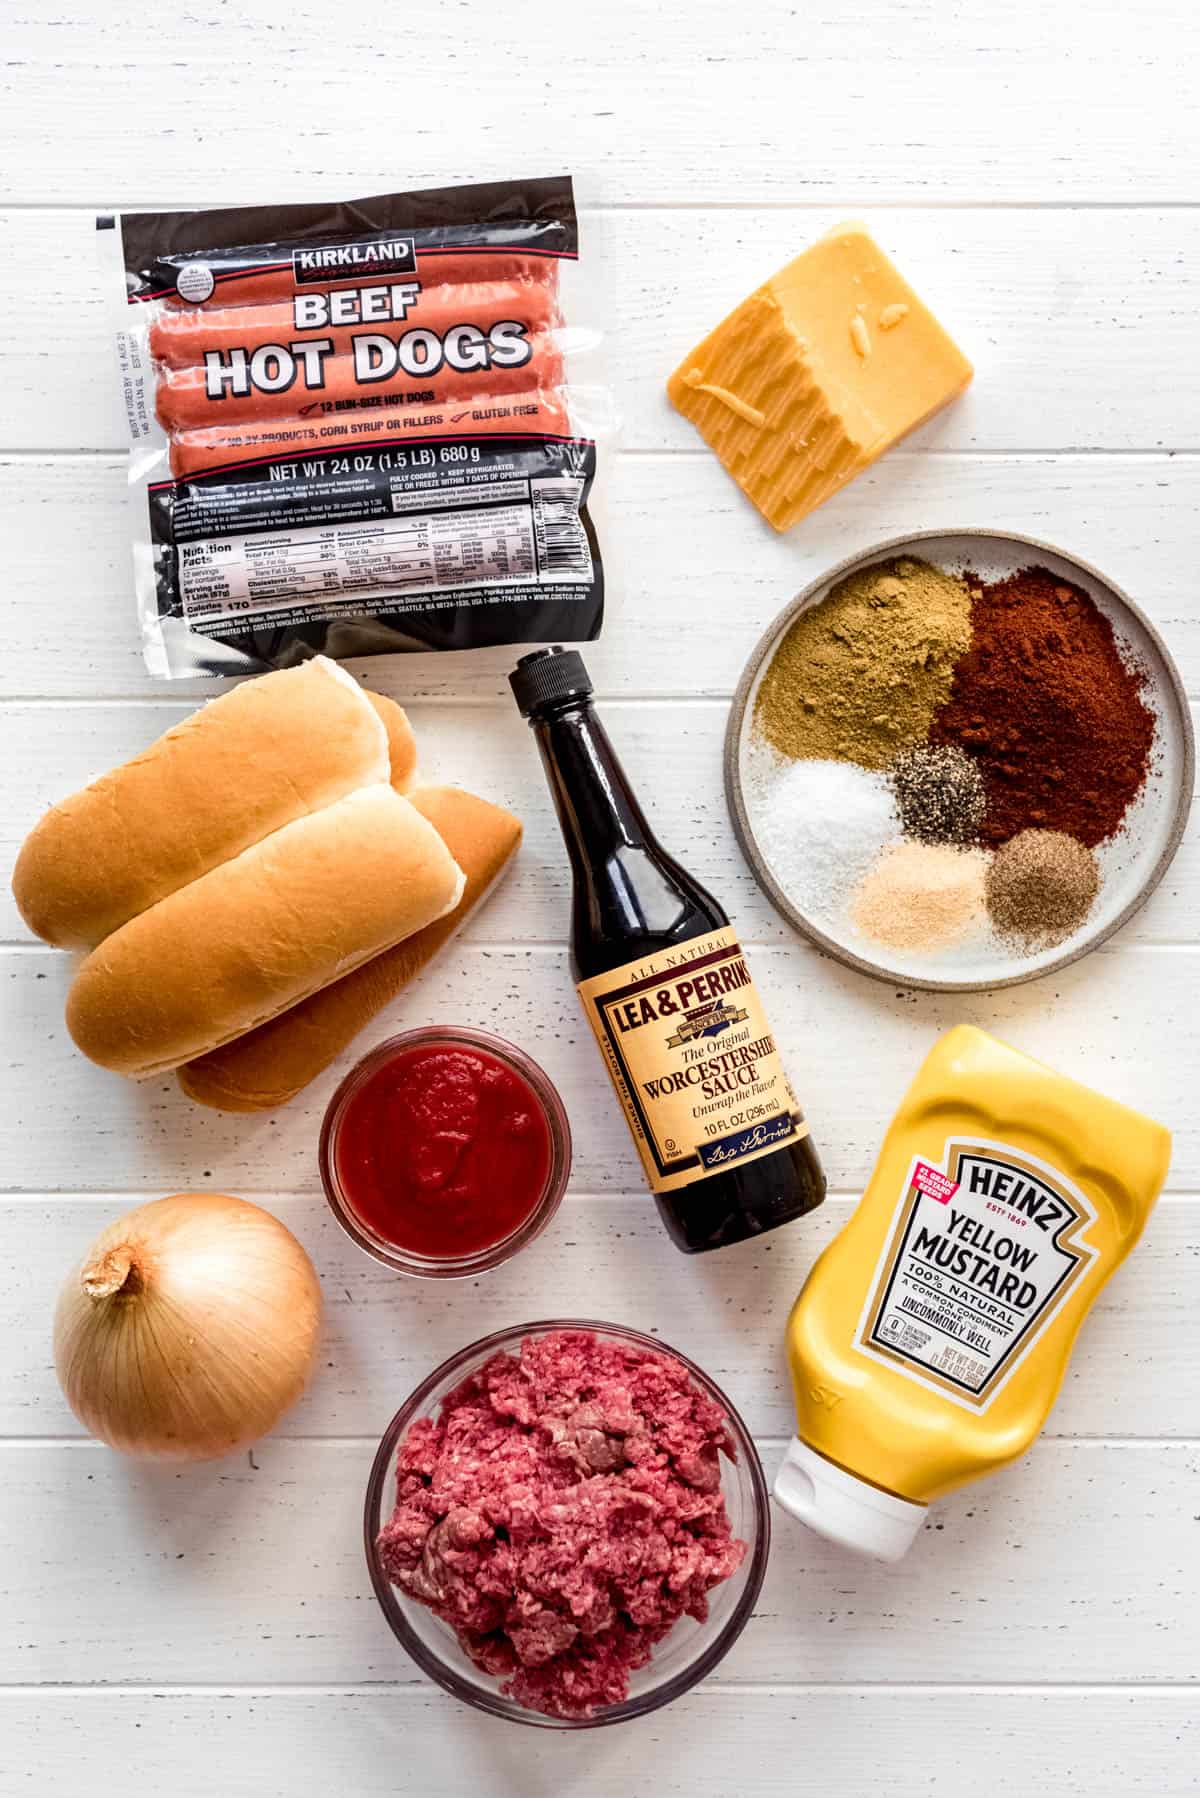 beef hot dogs, cheddar cheese, a plate of spices, hot dog buns, tomato sauce, Worcestershire sauce, mustard, an onion, ground beef